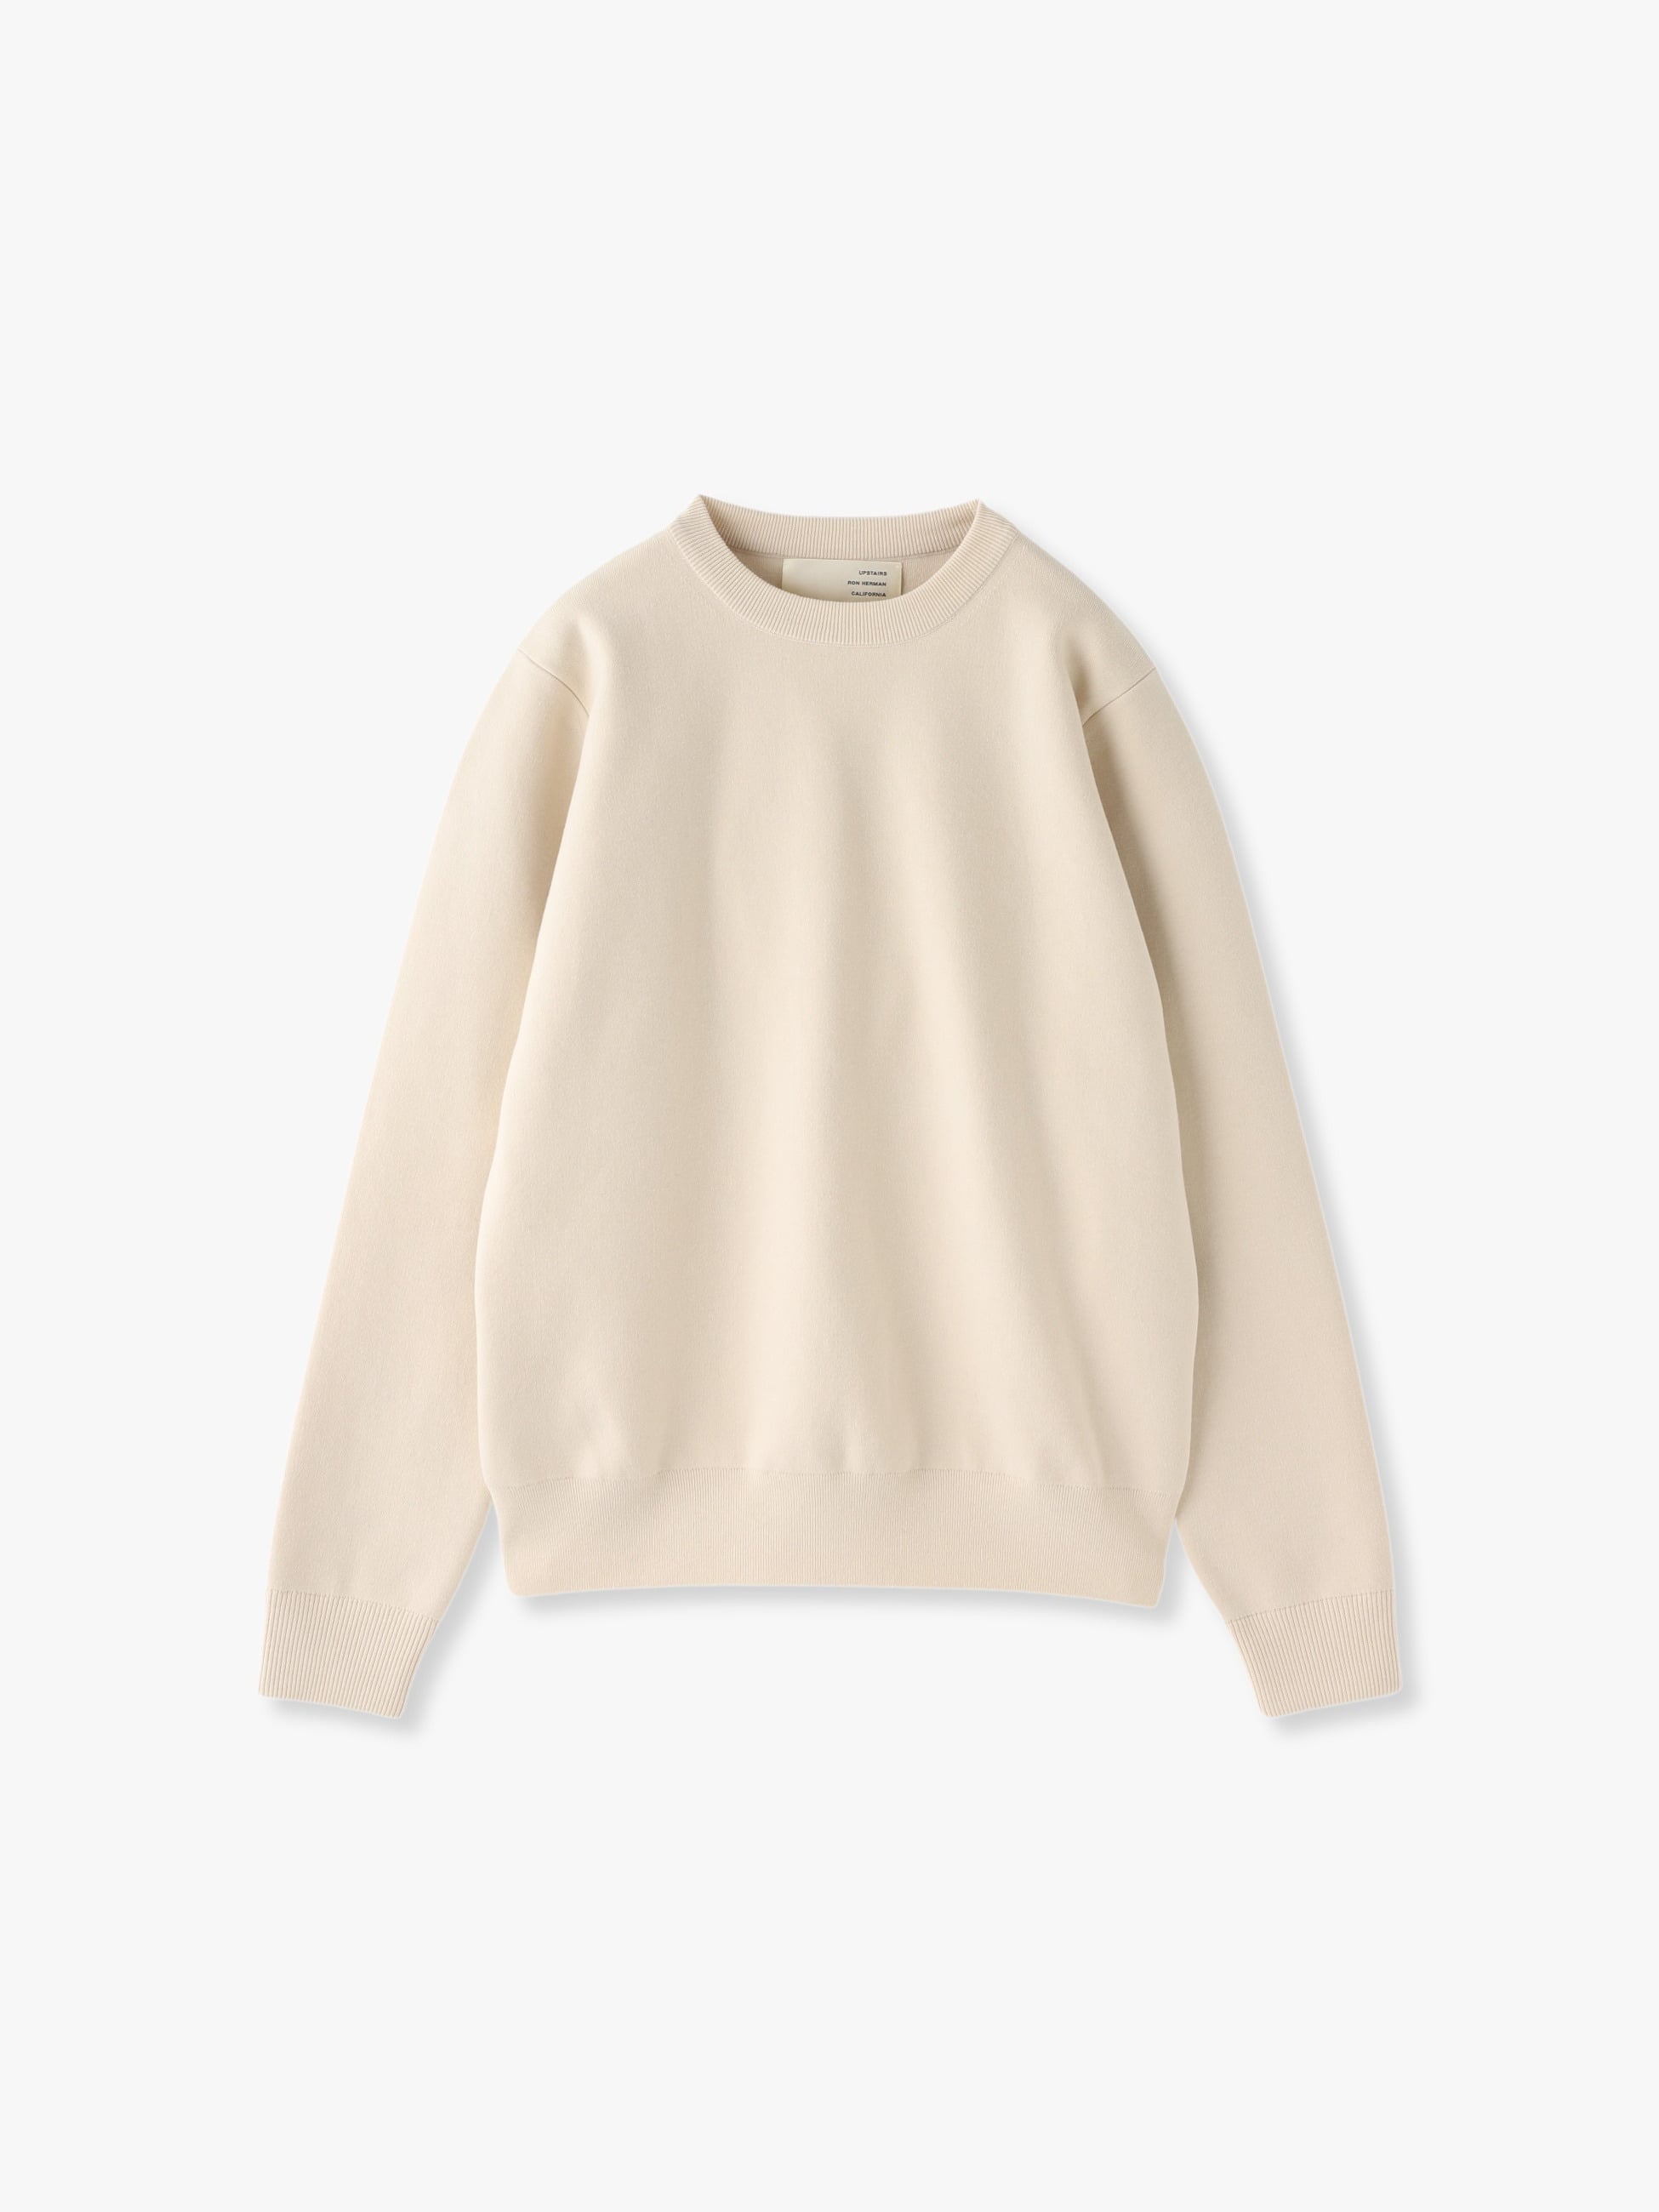 Brewed Protein Organic Cotton Knit Pullover 詳細画像 ivory 4